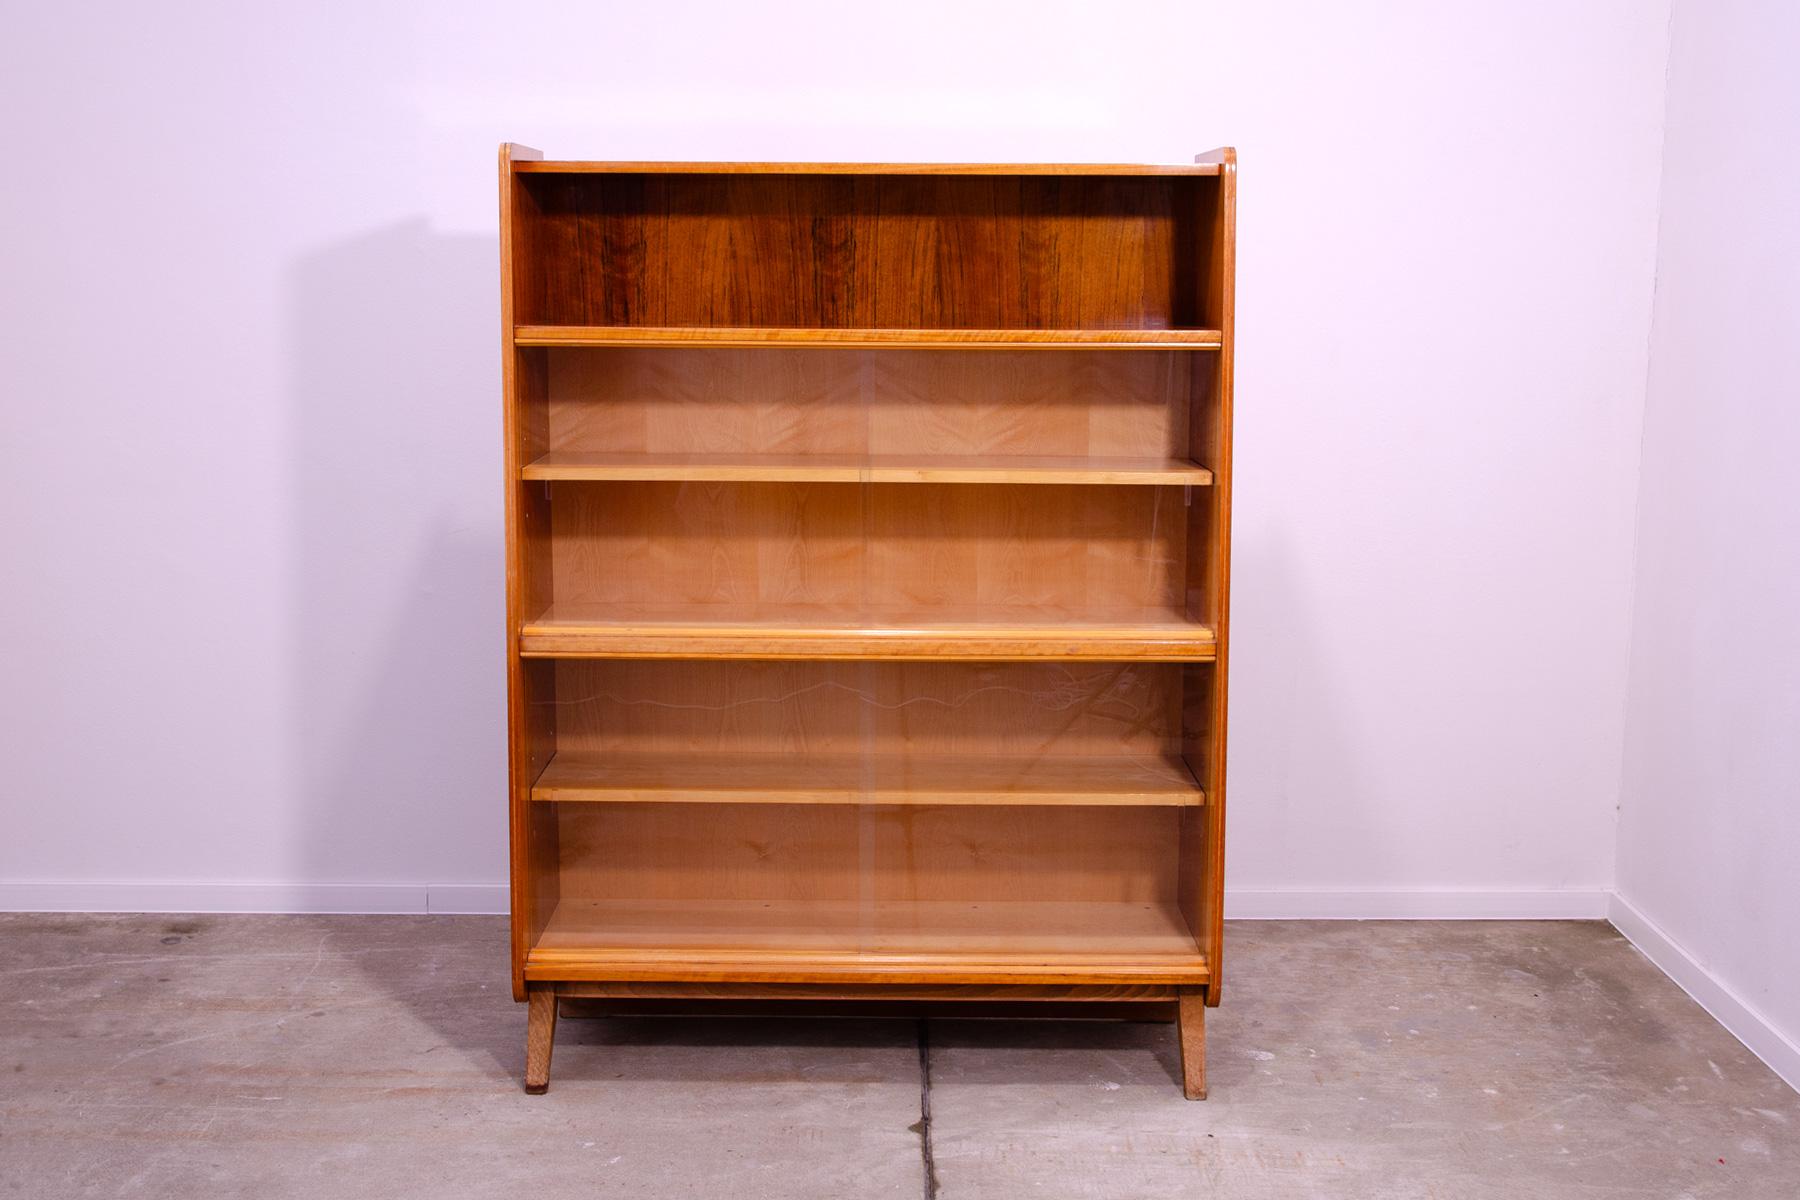 Mid century Vintage bookcase from the 1960´s. It was designed by František Jirák and was manufactured by Jitona company in the former Czechoslovakia. Features a simple design, a glazed section with five storage spaces. There is a slightly different